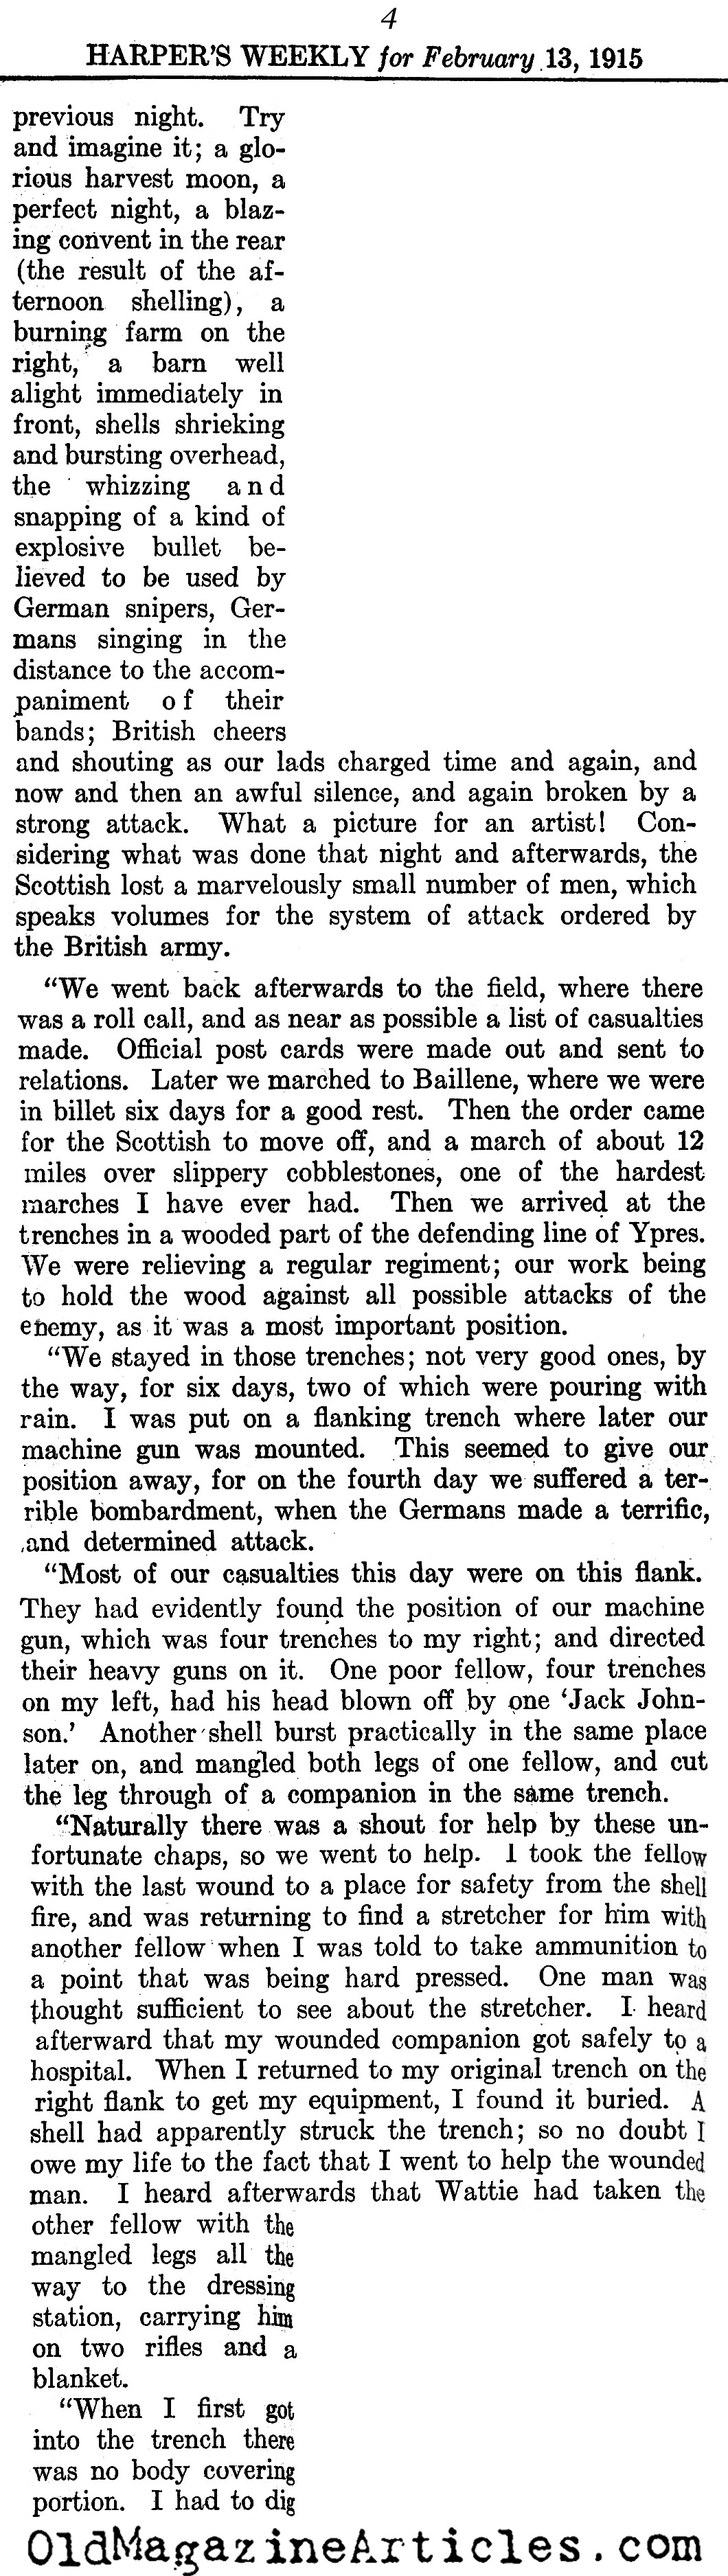 A Briton Writes From Ypres (Harper's Weekly, 1915)